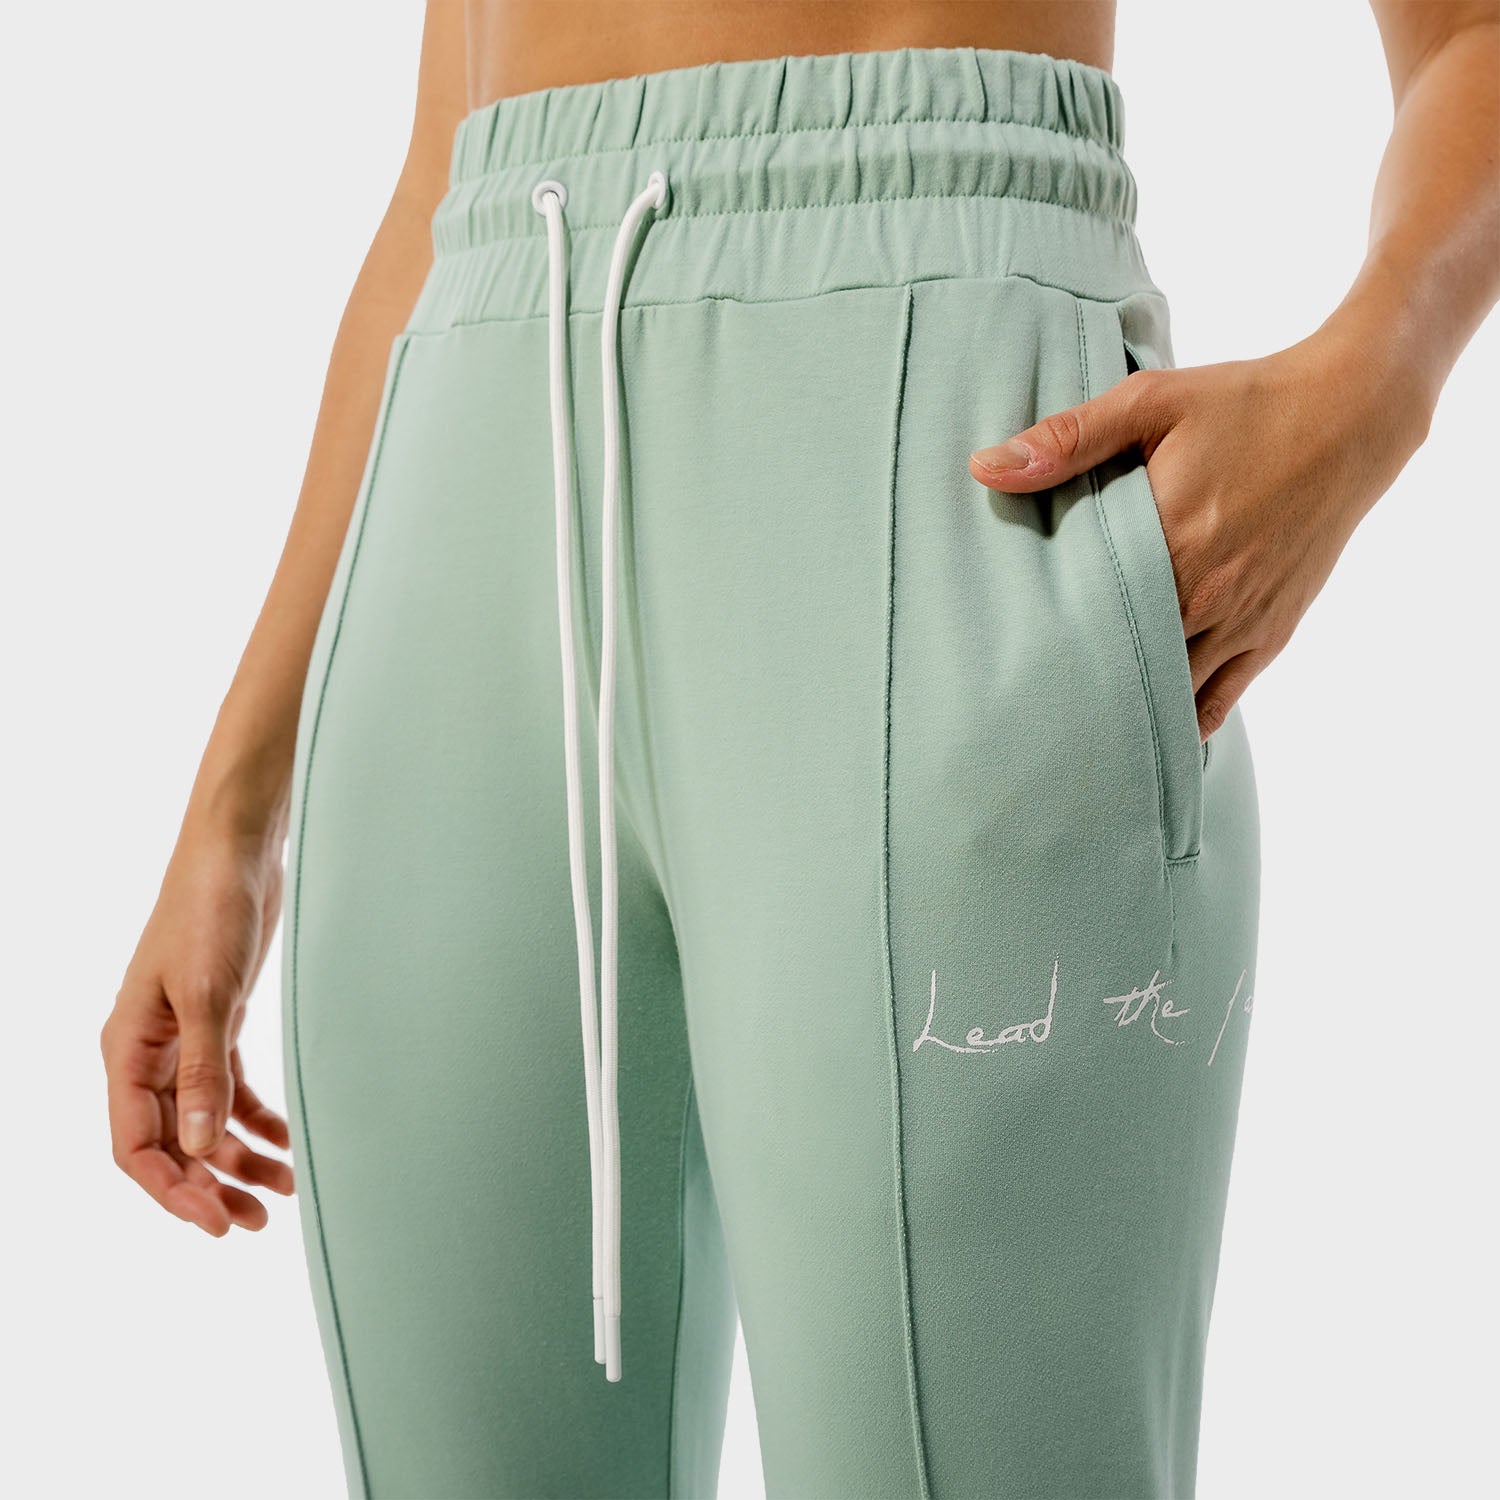 squatwolf-gym-pants-for-women-vibe-joggers-duck-egg-blue-workout-clothes